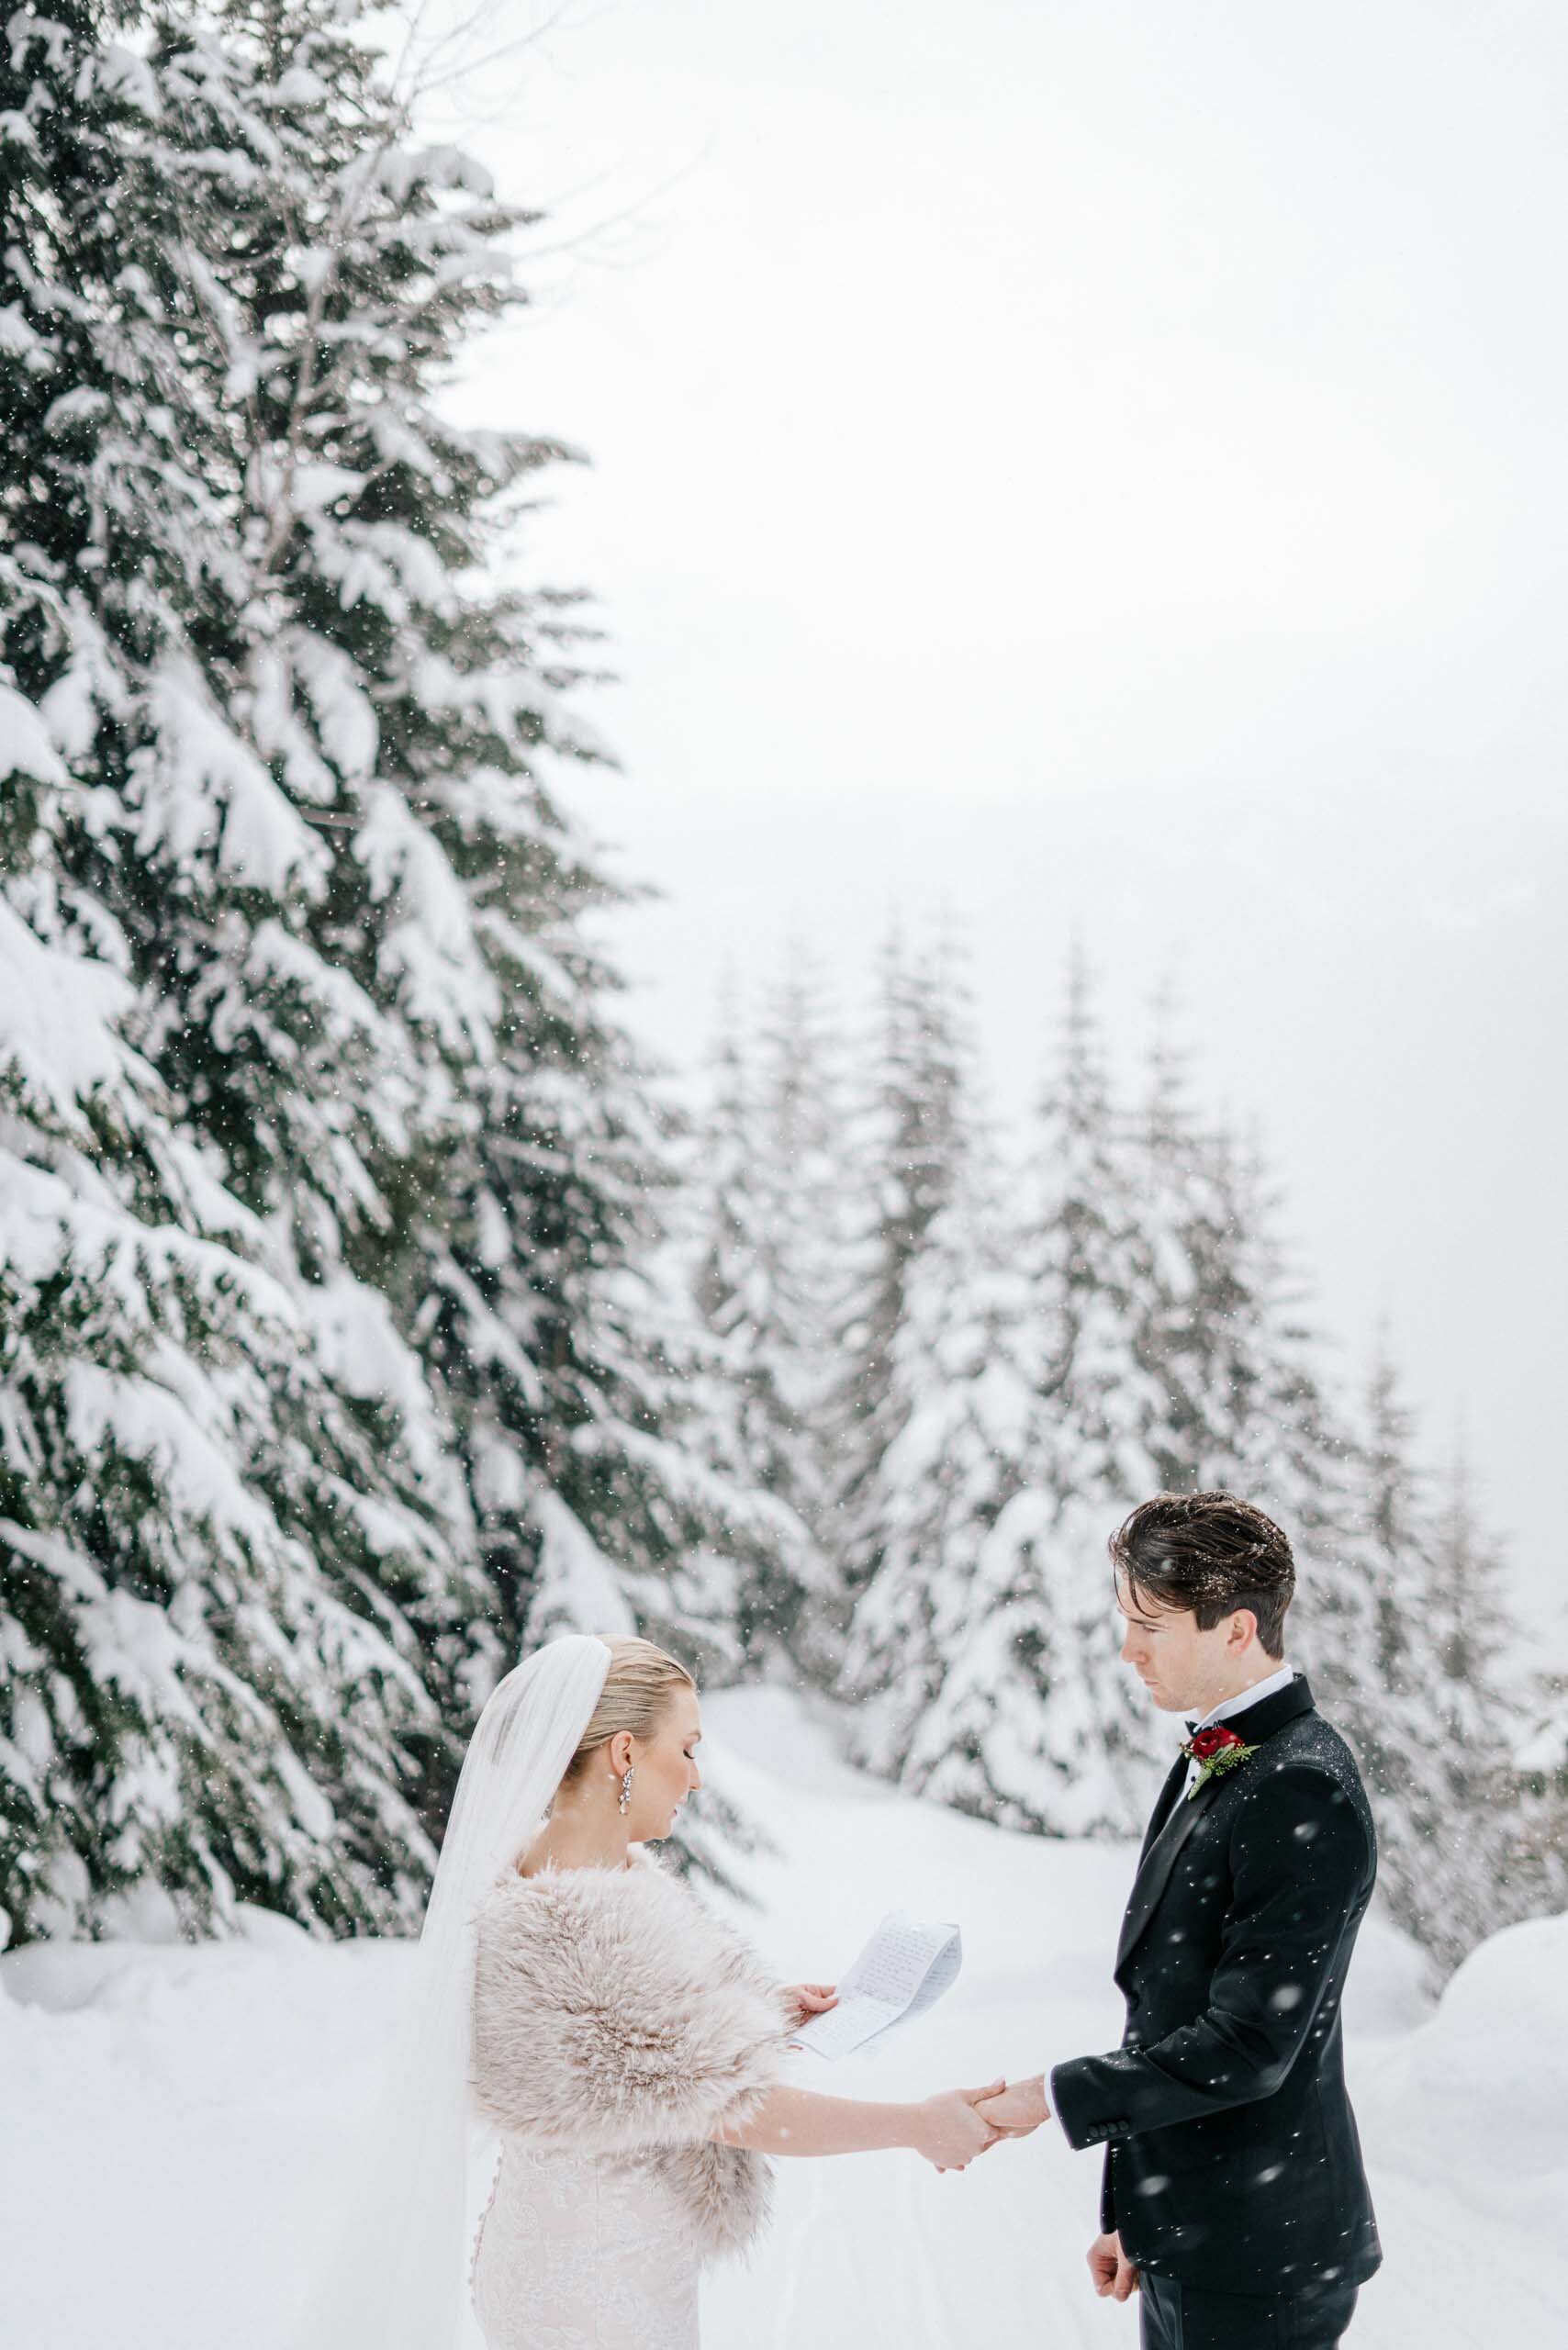 A bride and groom exchange rings in the snow at Whistler BC.